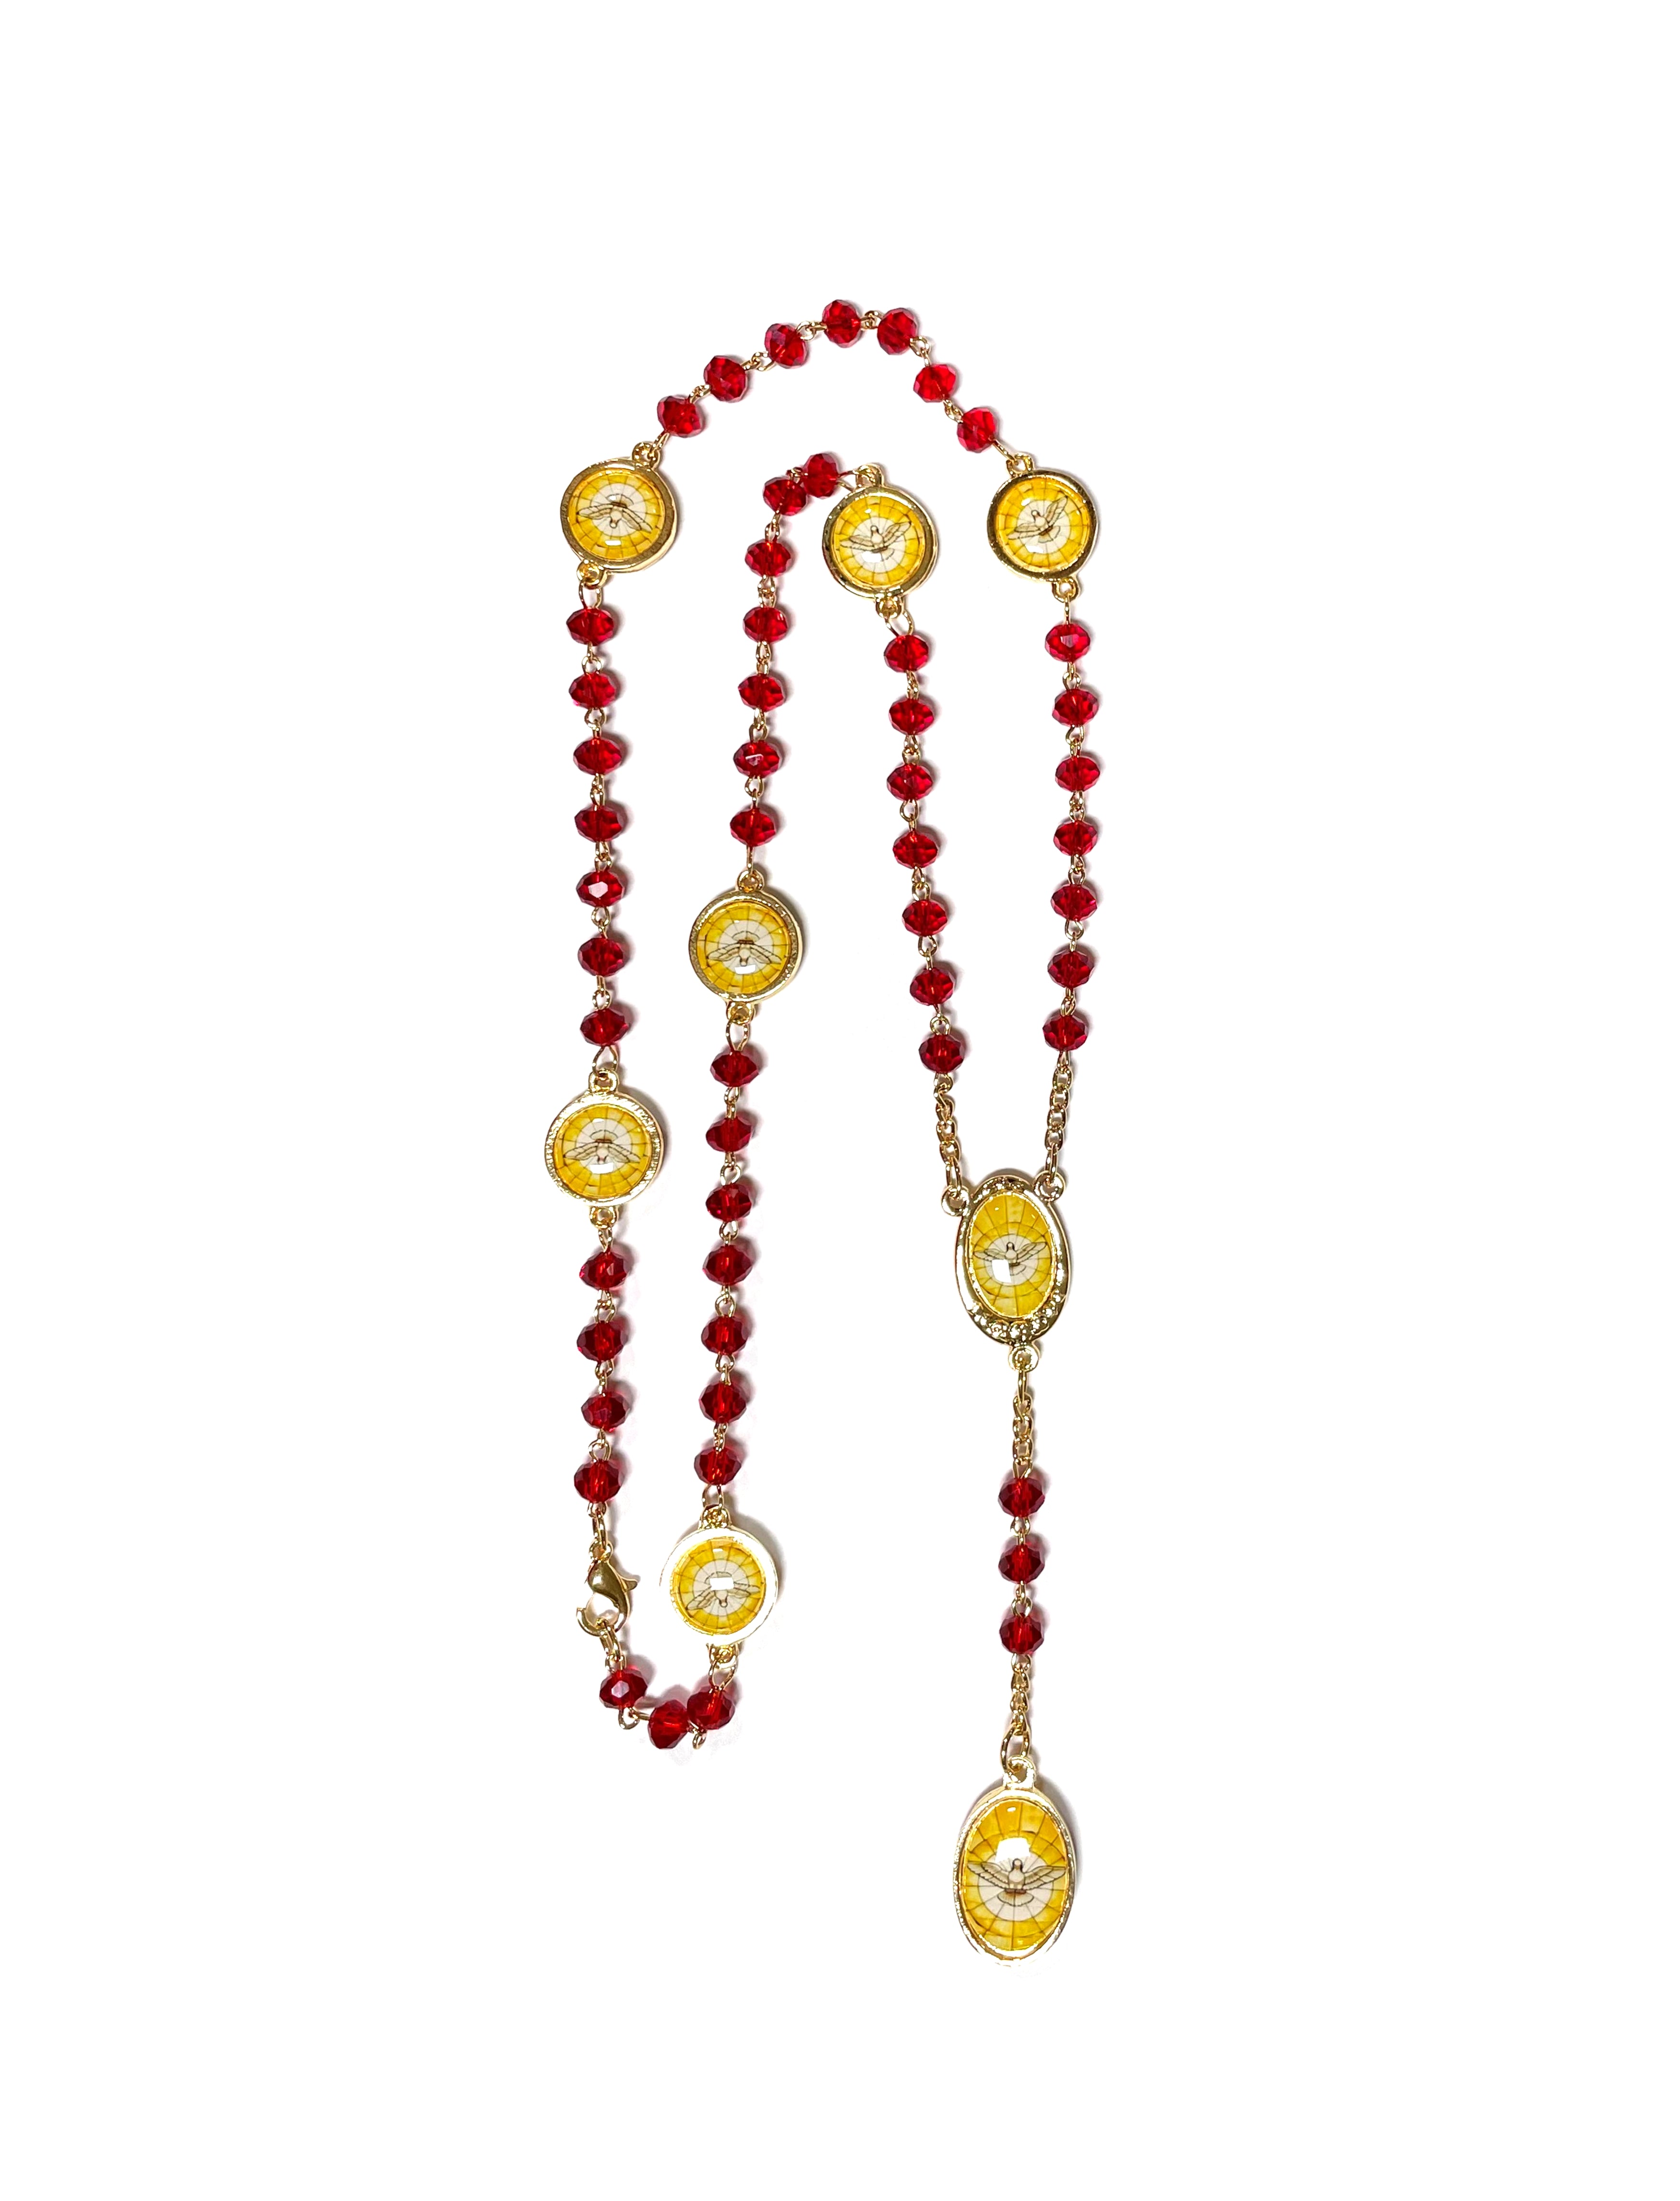 Holy spirit rosary with gold accent and red beads